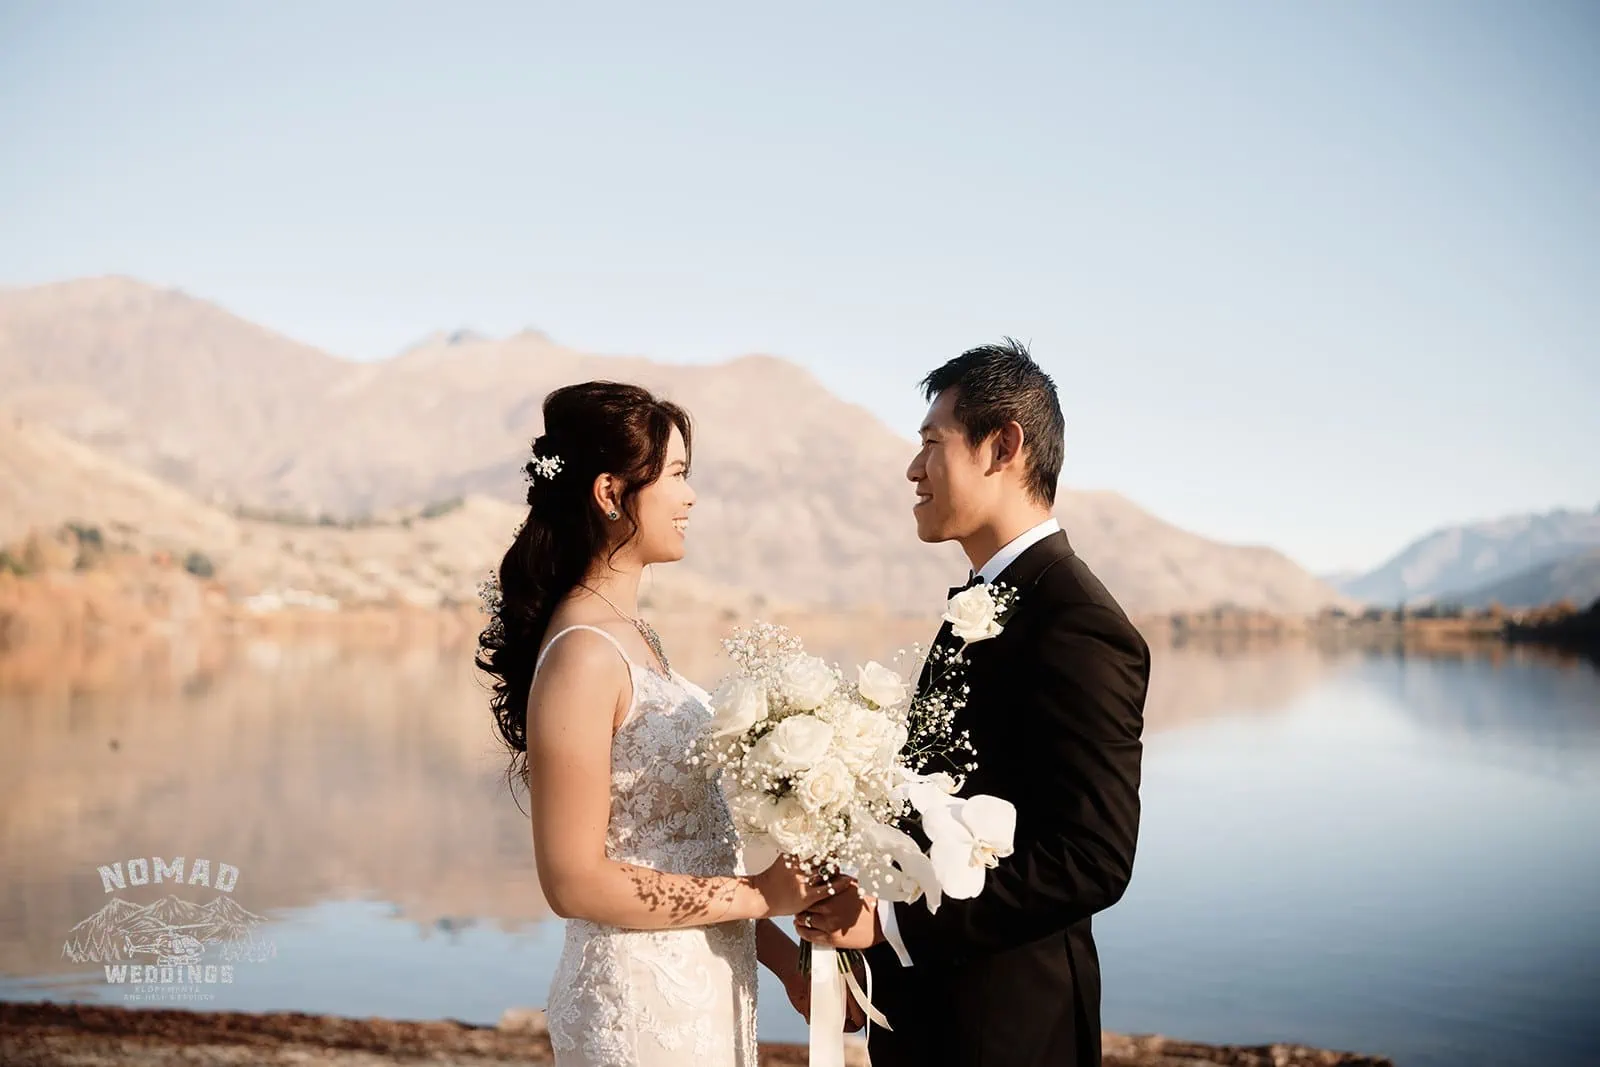 Connie and Andrew's pre-wedding shoot next to The Remarkables mountains and a lake.